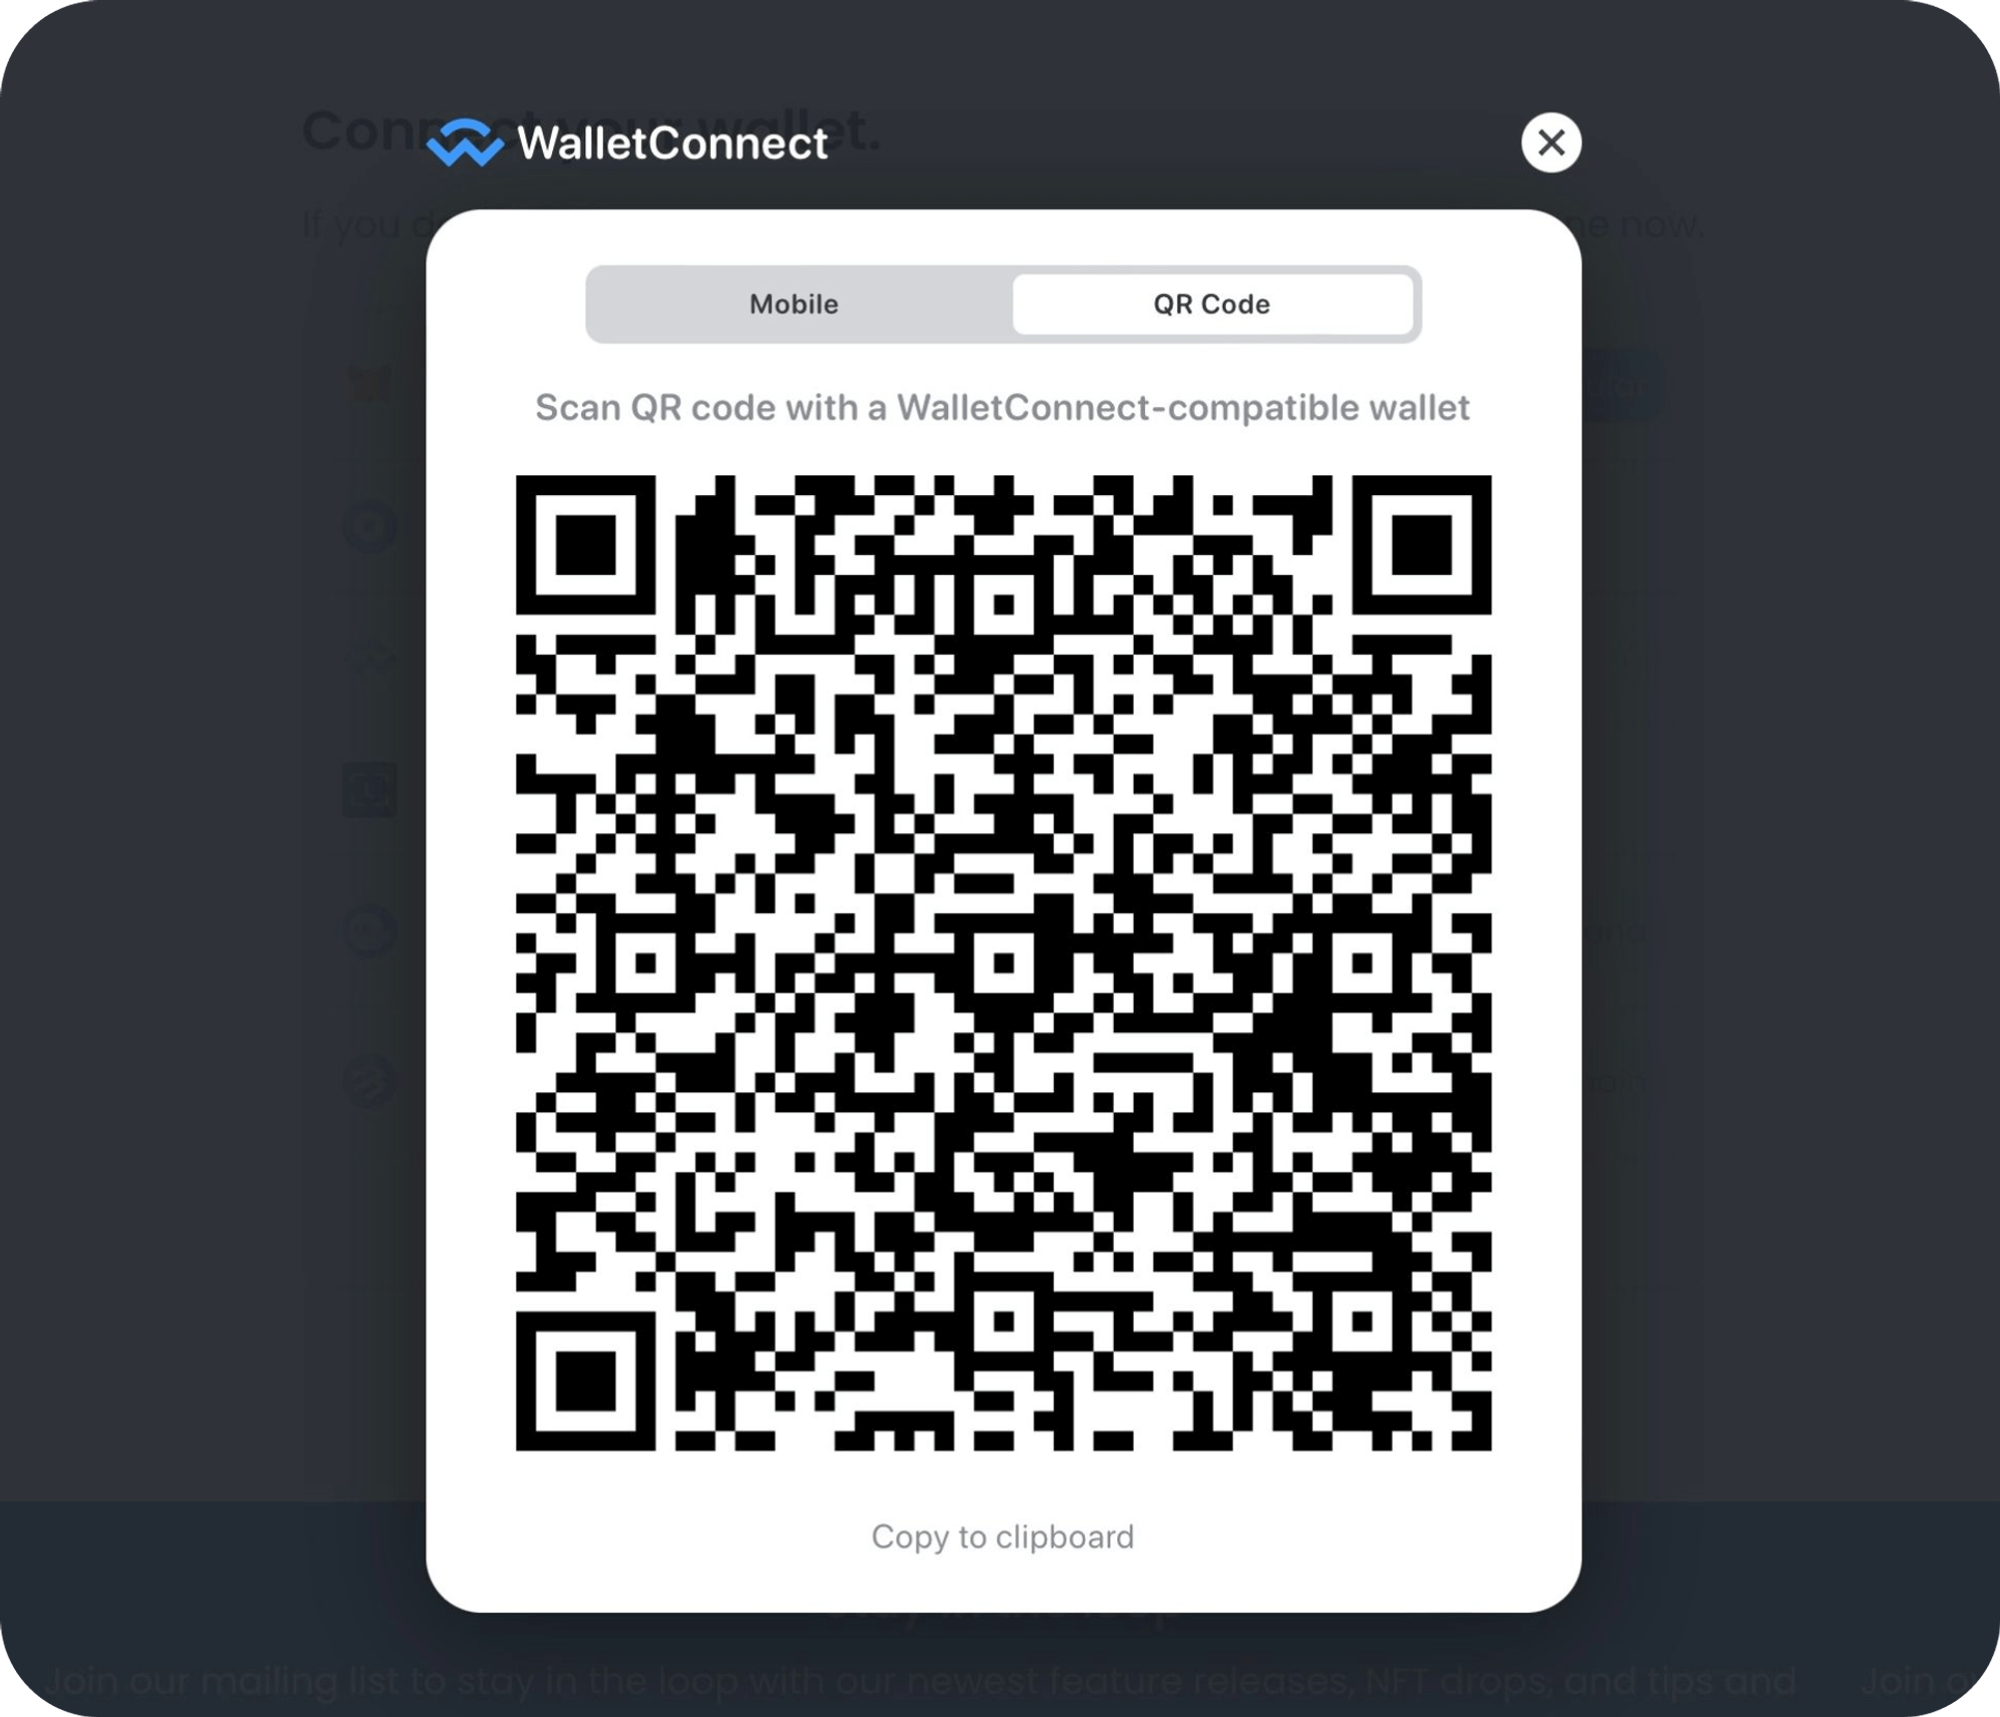 Click 'Wallet Connect' and click QR code option, and the QR code will appear to connect your wallet.